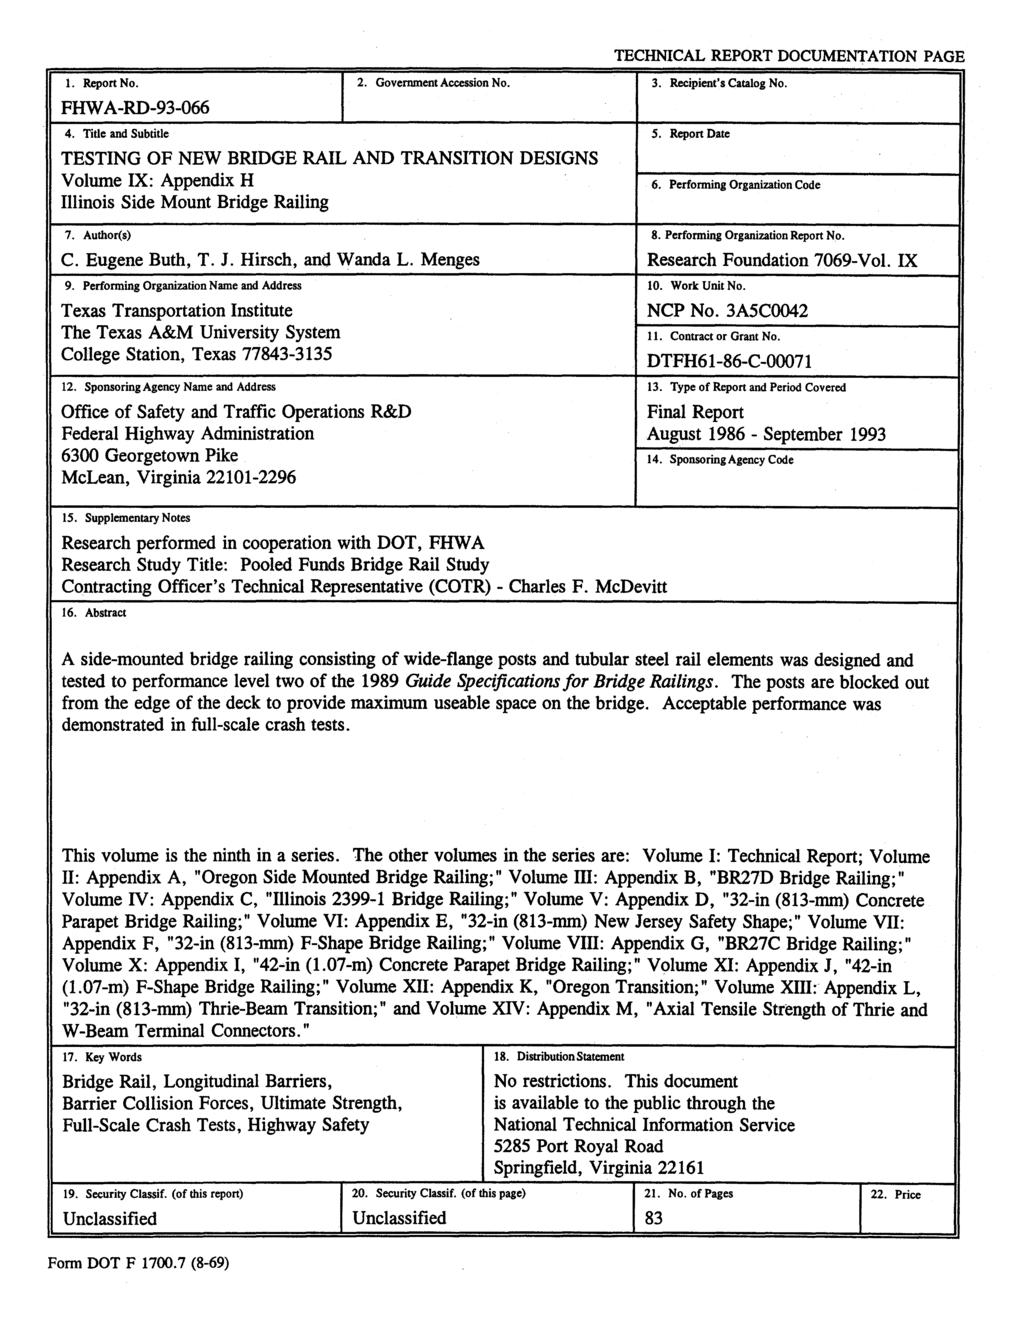 TECHNICAL REPORT DOCUMENTATION PAGE 1. Report No. 2. Goverrunent Accession No. FHW A-RD-93-066 4.